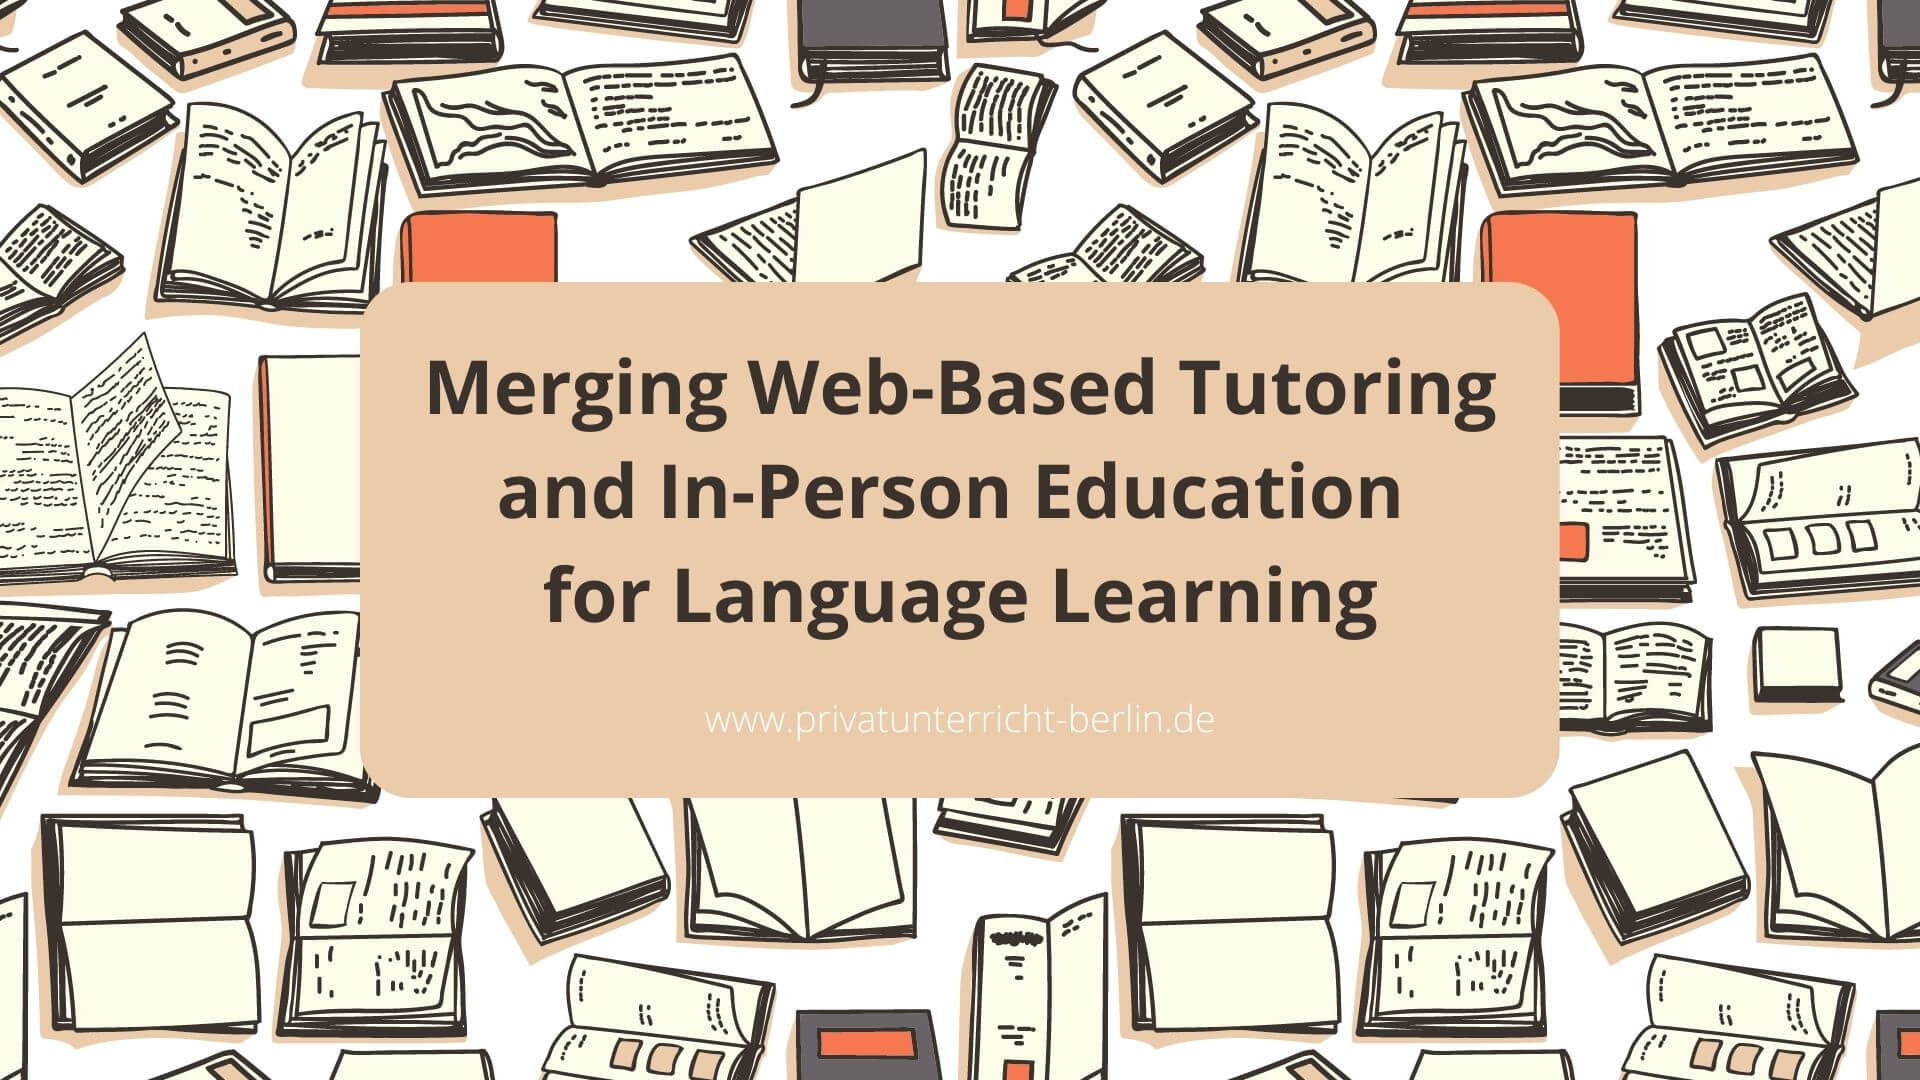 Merging Web-Based Tutoring And In-Person Education For Language Learning